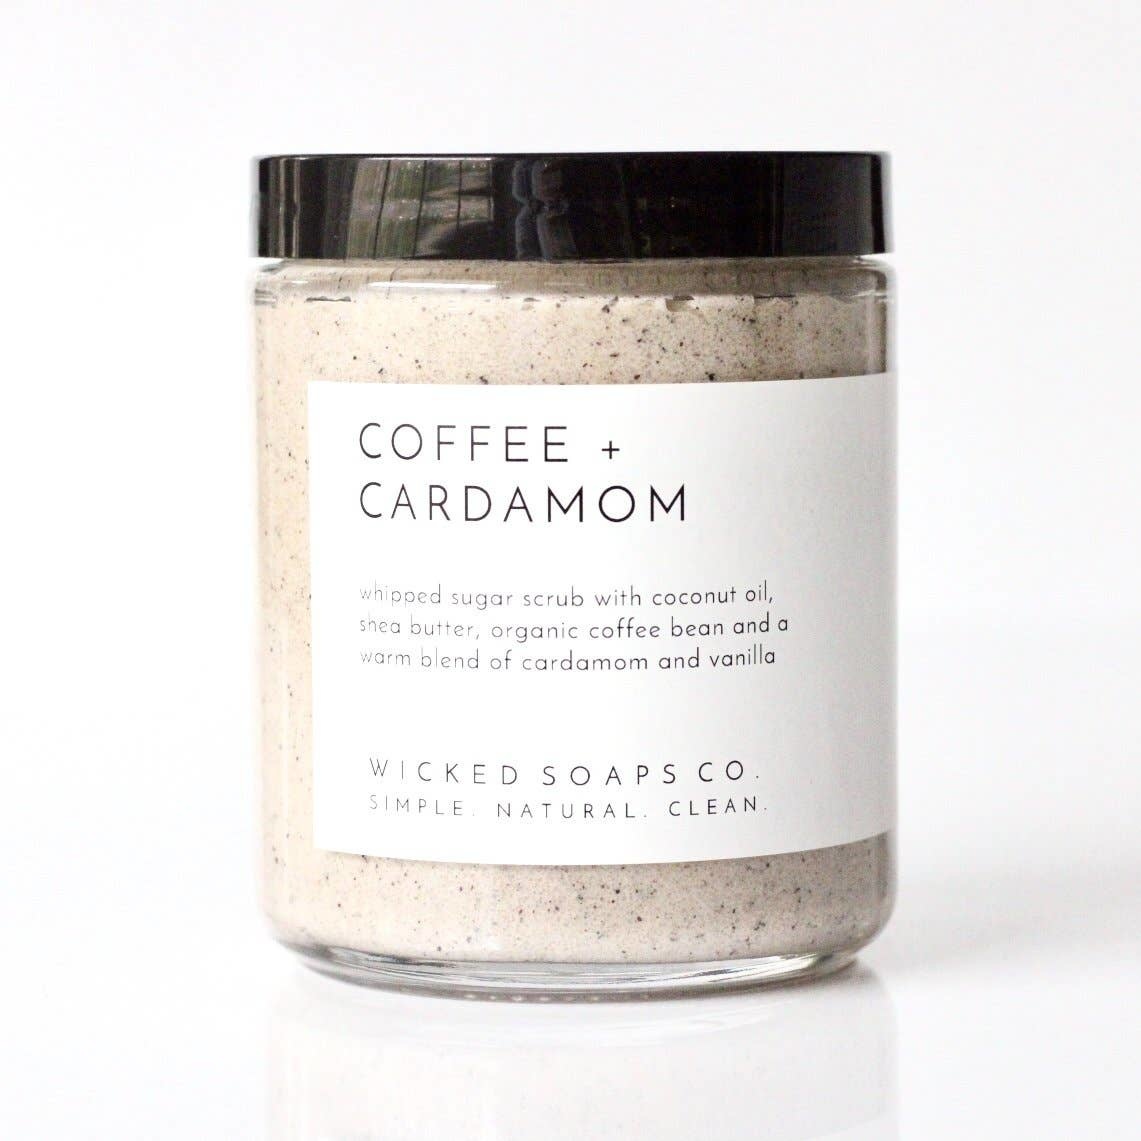 WICKED SOAPS WICKED SOAPS COFFEE 7 CARAMON WHIPPED SUGAR SCRUB